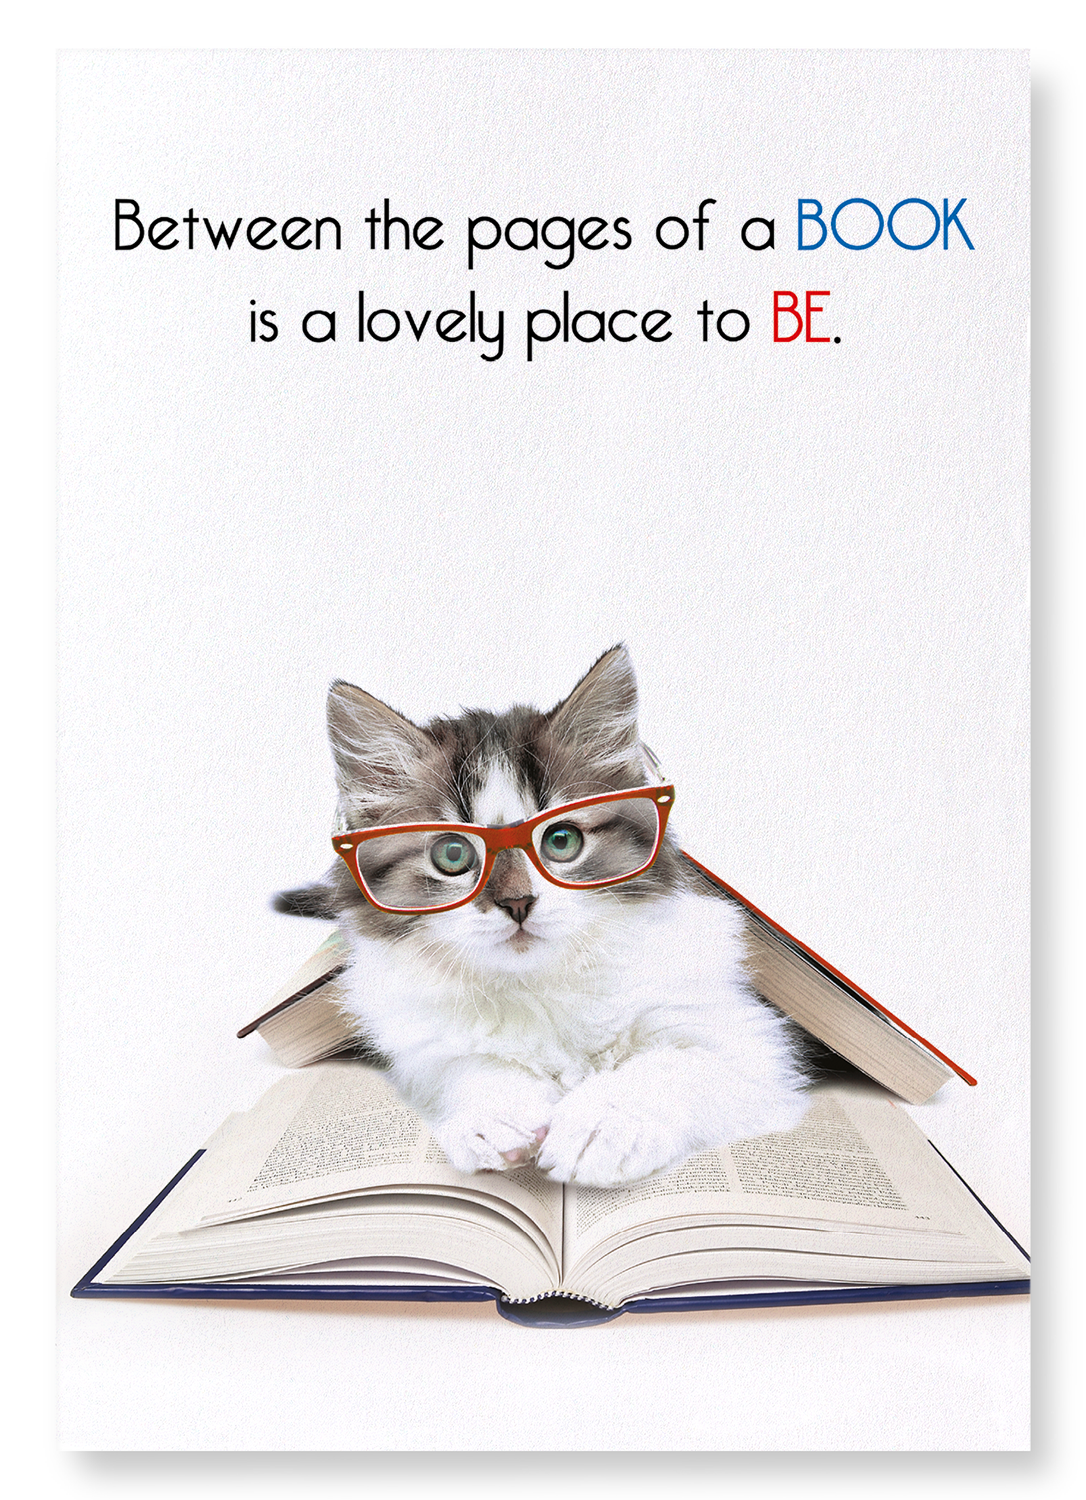 BETWEEN THE PAGES: Funny Animal Art print